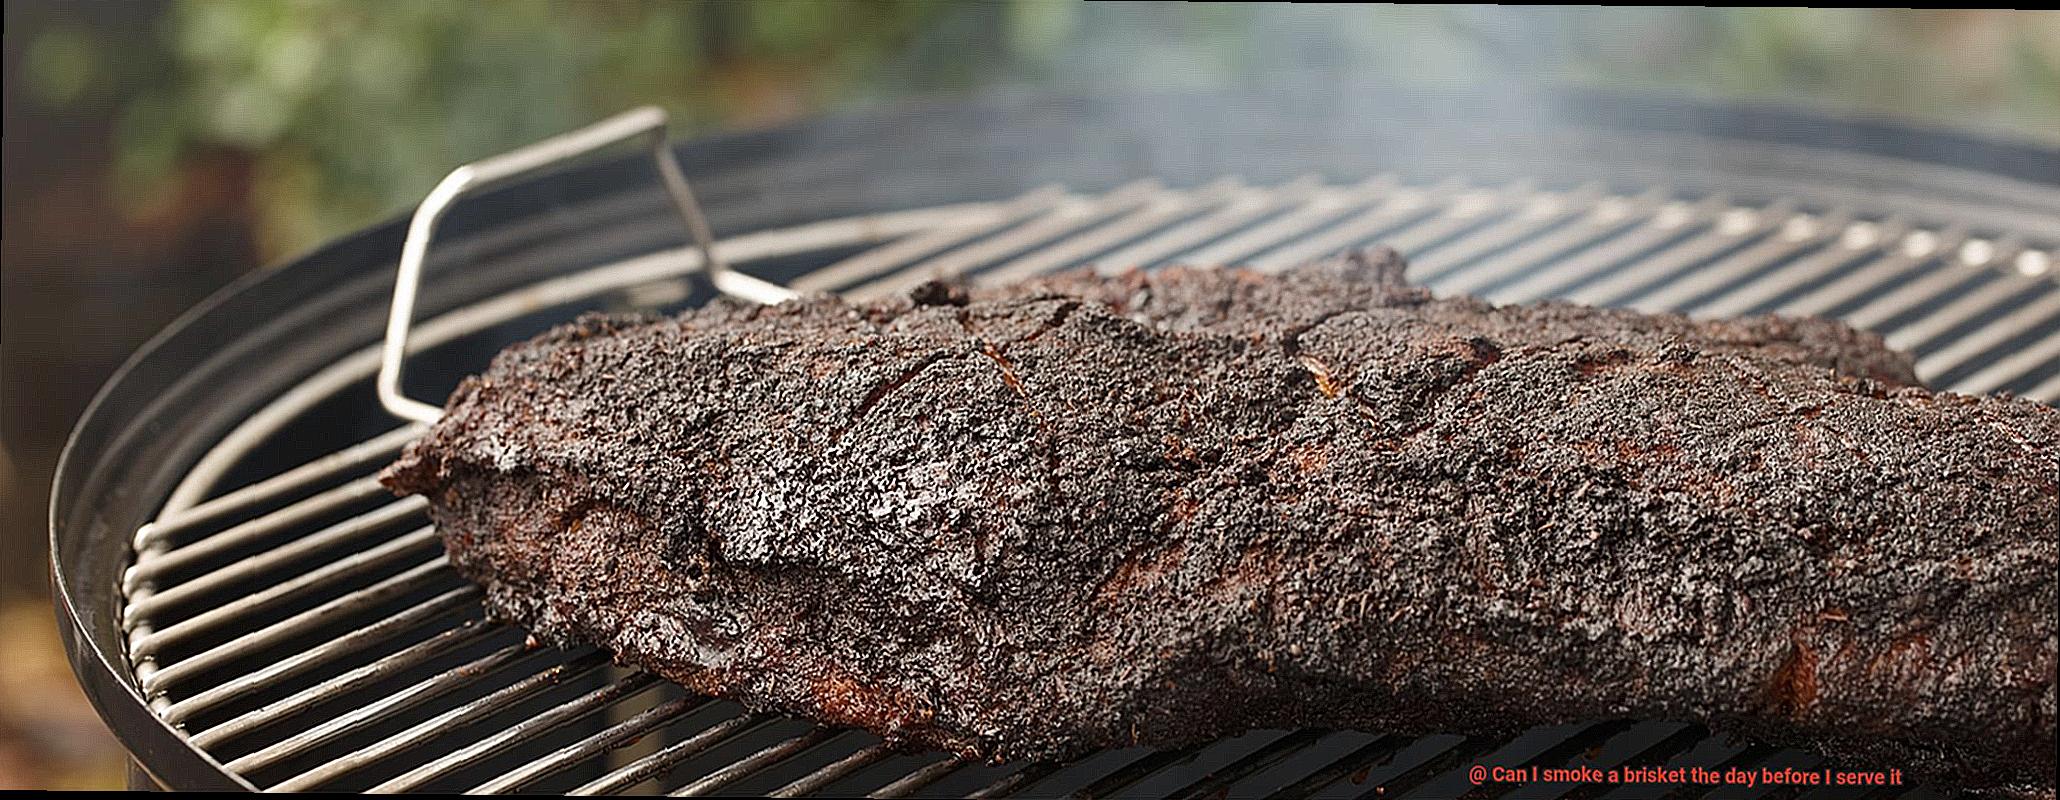 Can I smoke a brisket the day before I serve it-4